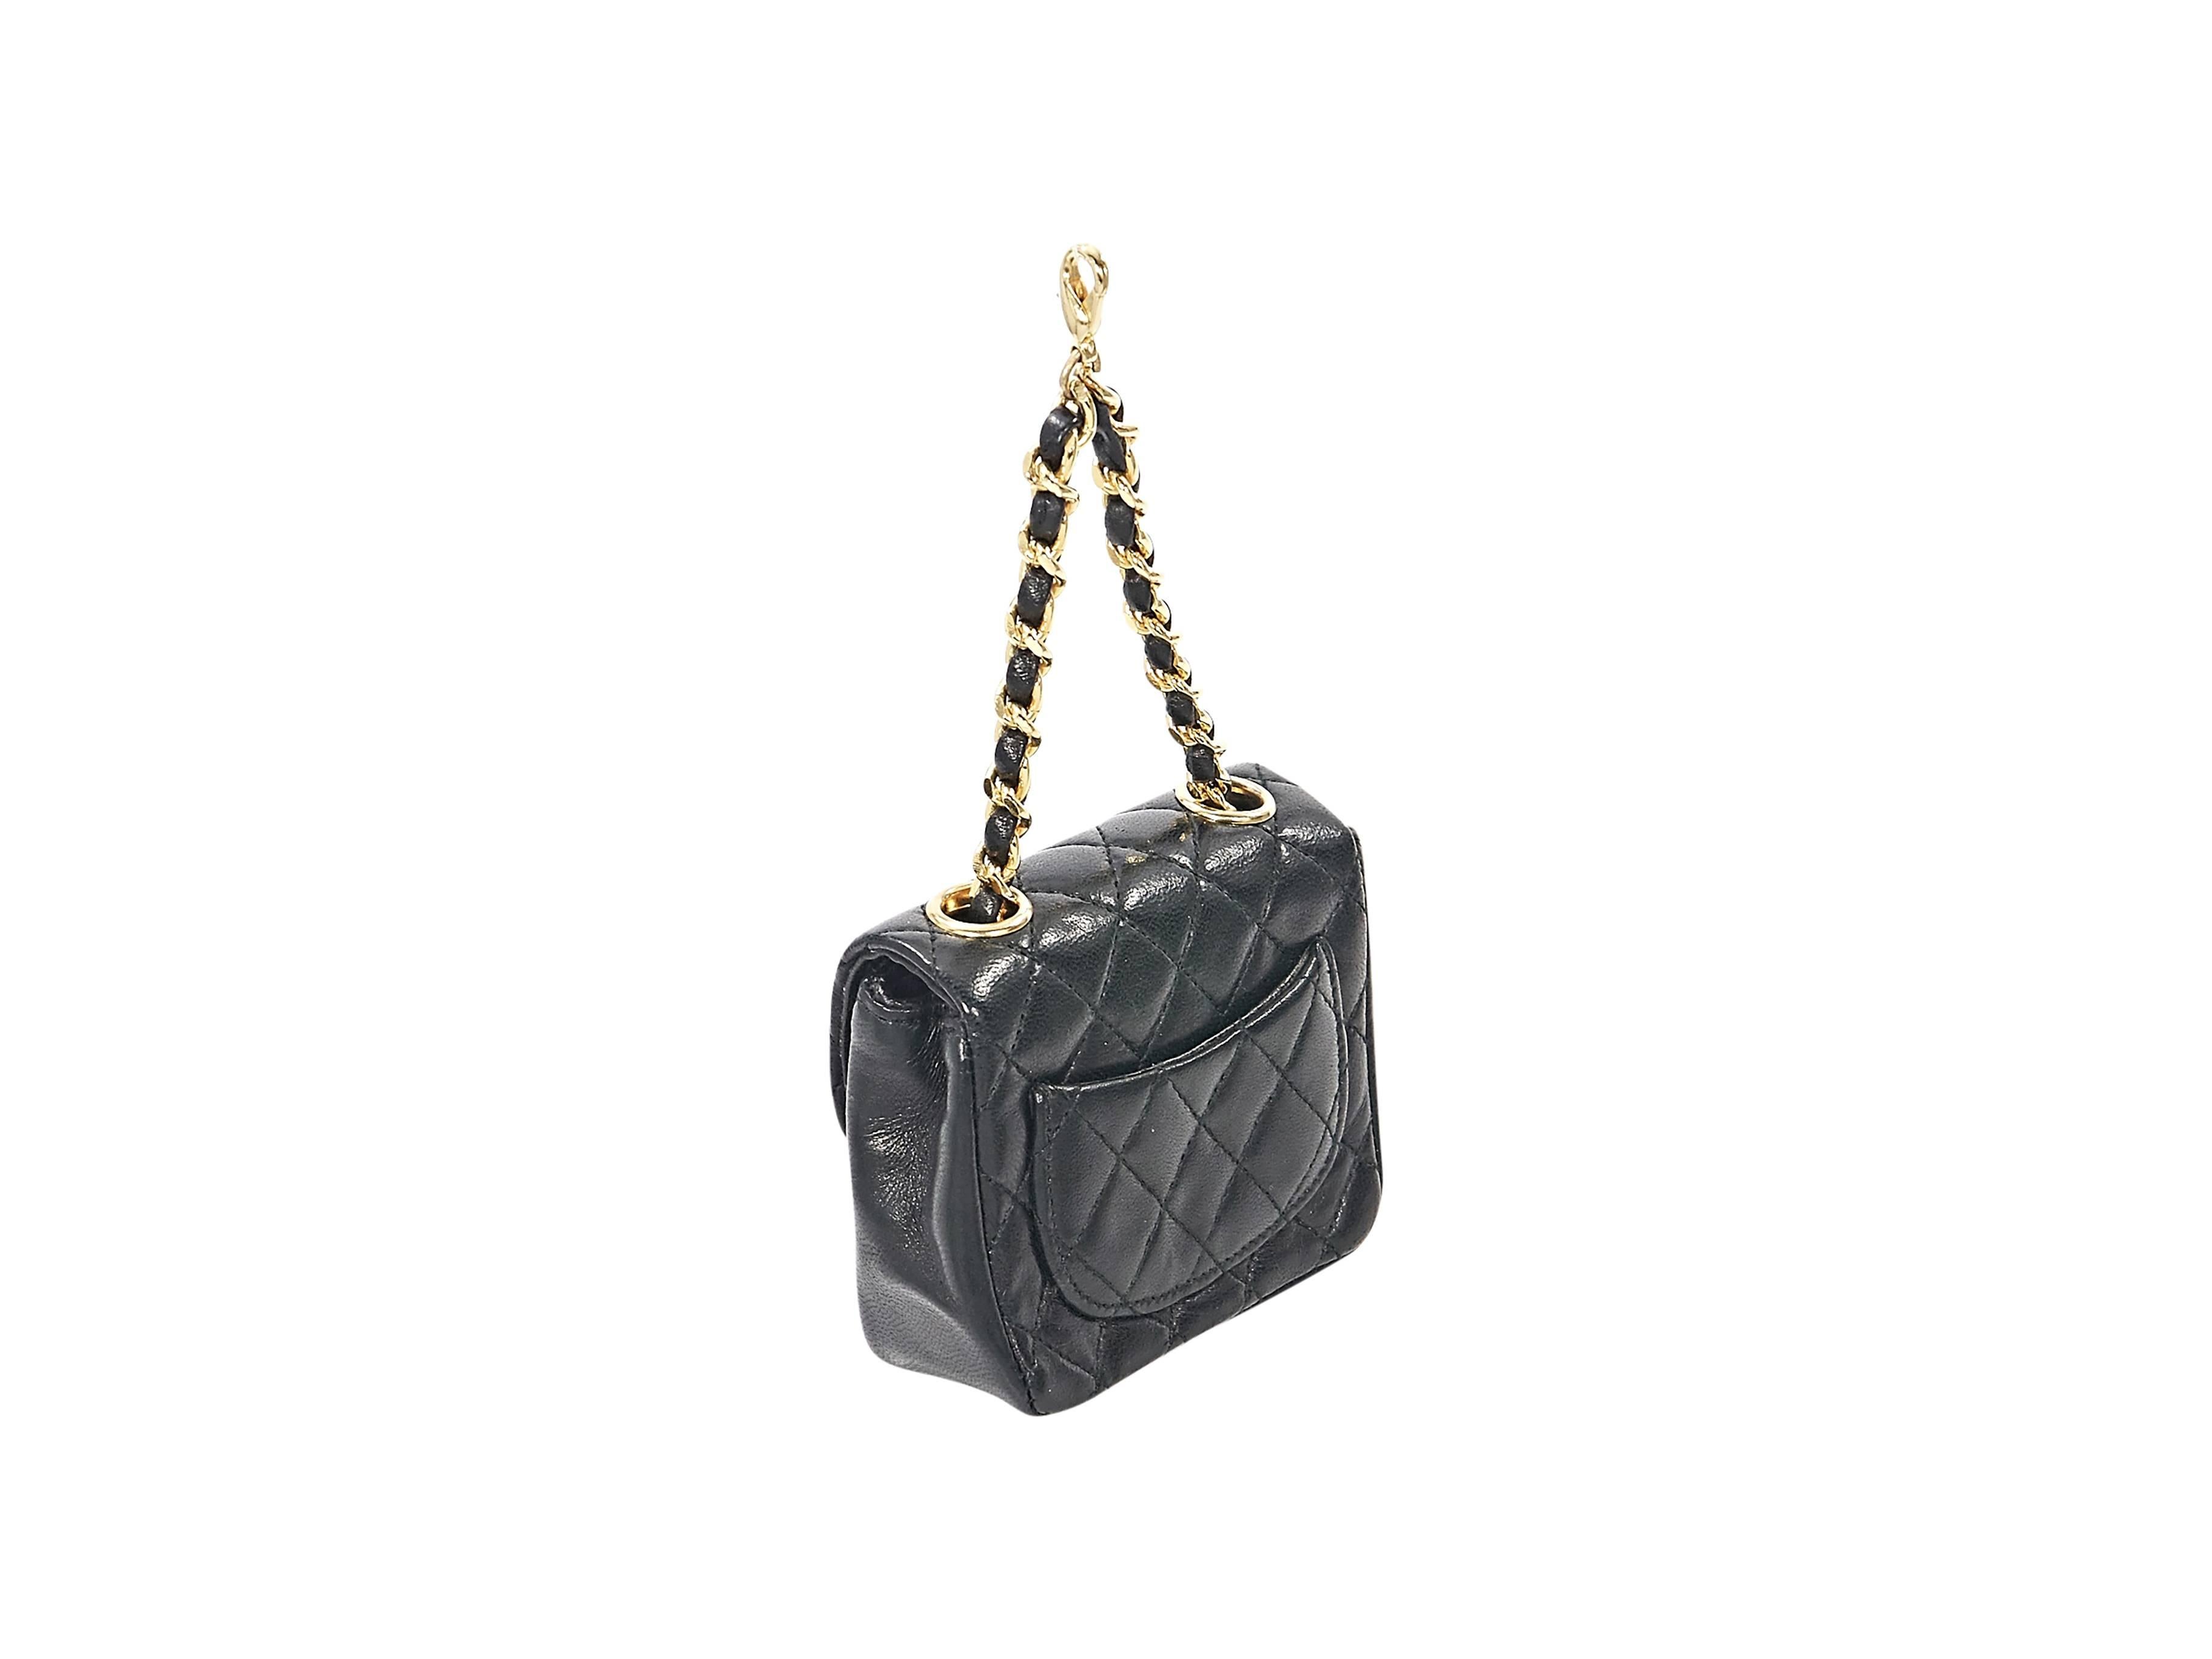 Product details:  Black quilted leather micro mini bag by Chanel.  Leather woven chain strap with lobster clasp closure.  Front flap.  Hidden magnetic snap closure.  Leather lined interior.  Back exterior slide pocket.  3.5